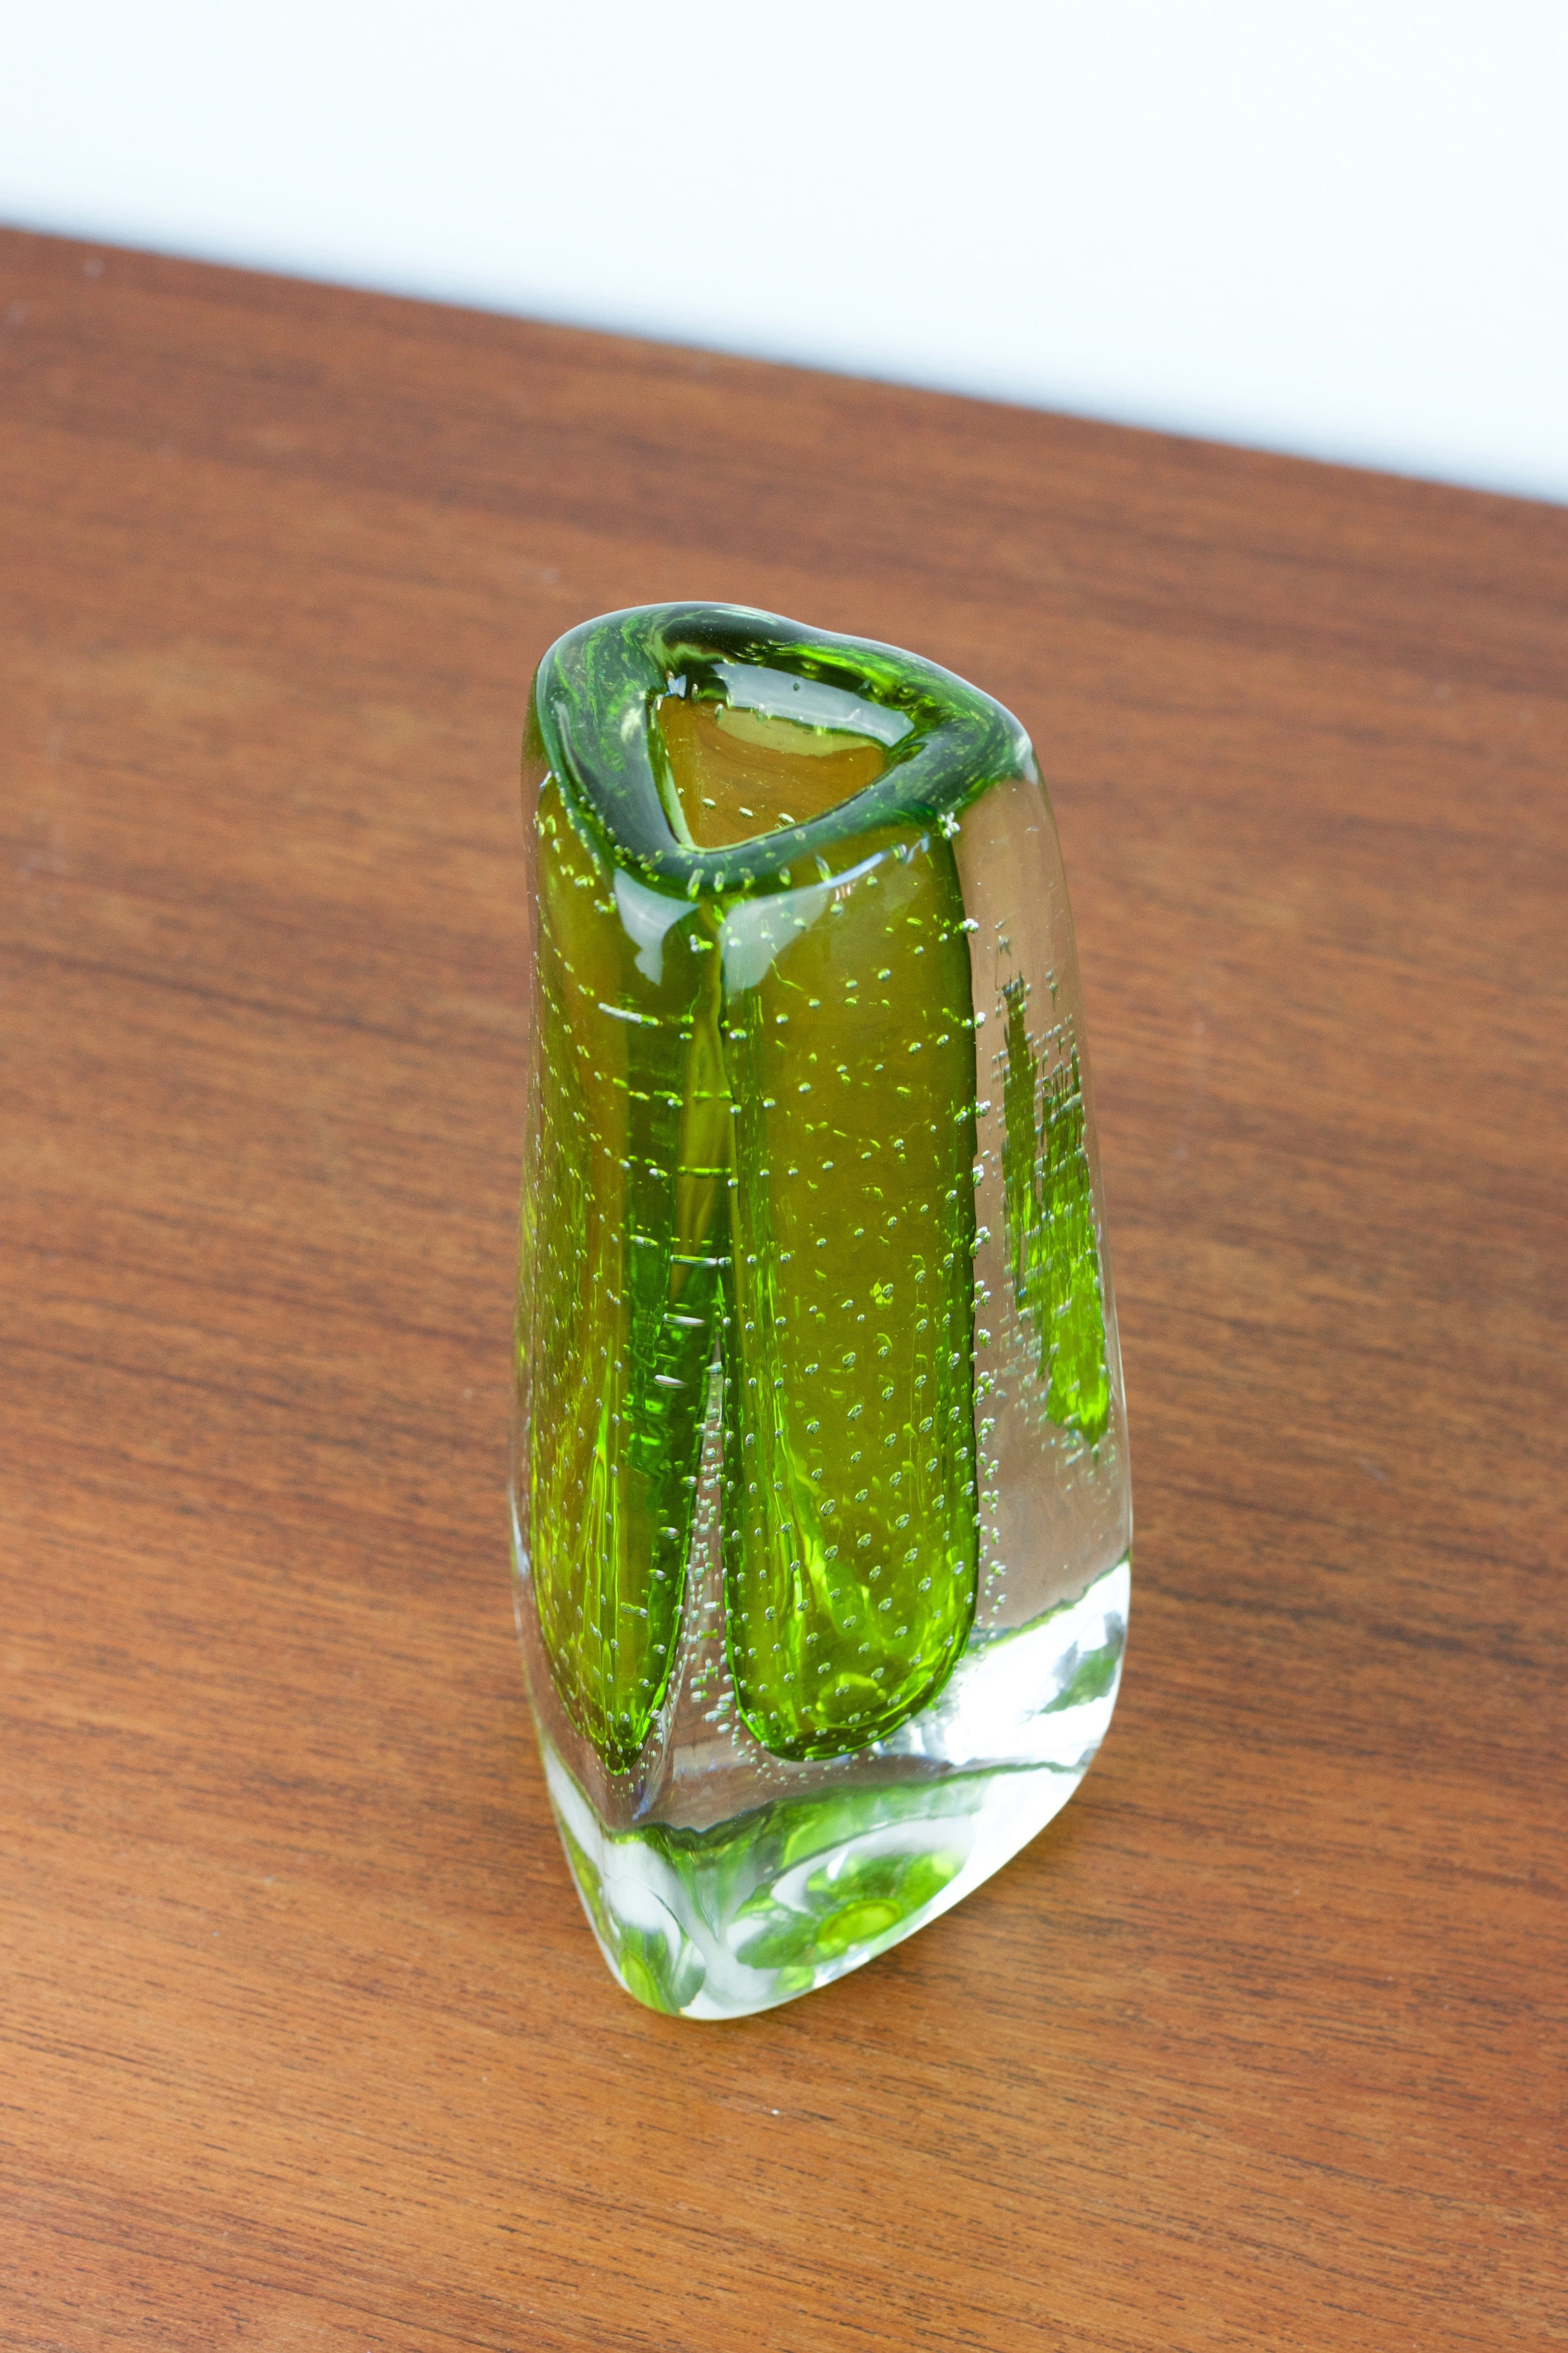 19 Stylish Green Bubble Glass Vase 2024 free download green bubble glass vase of large and heavy 1970s german emerald green bubble ice glass vase in large and heavy 1970s german emerald green bubble ice glass vase theresienthal at 1stdibs